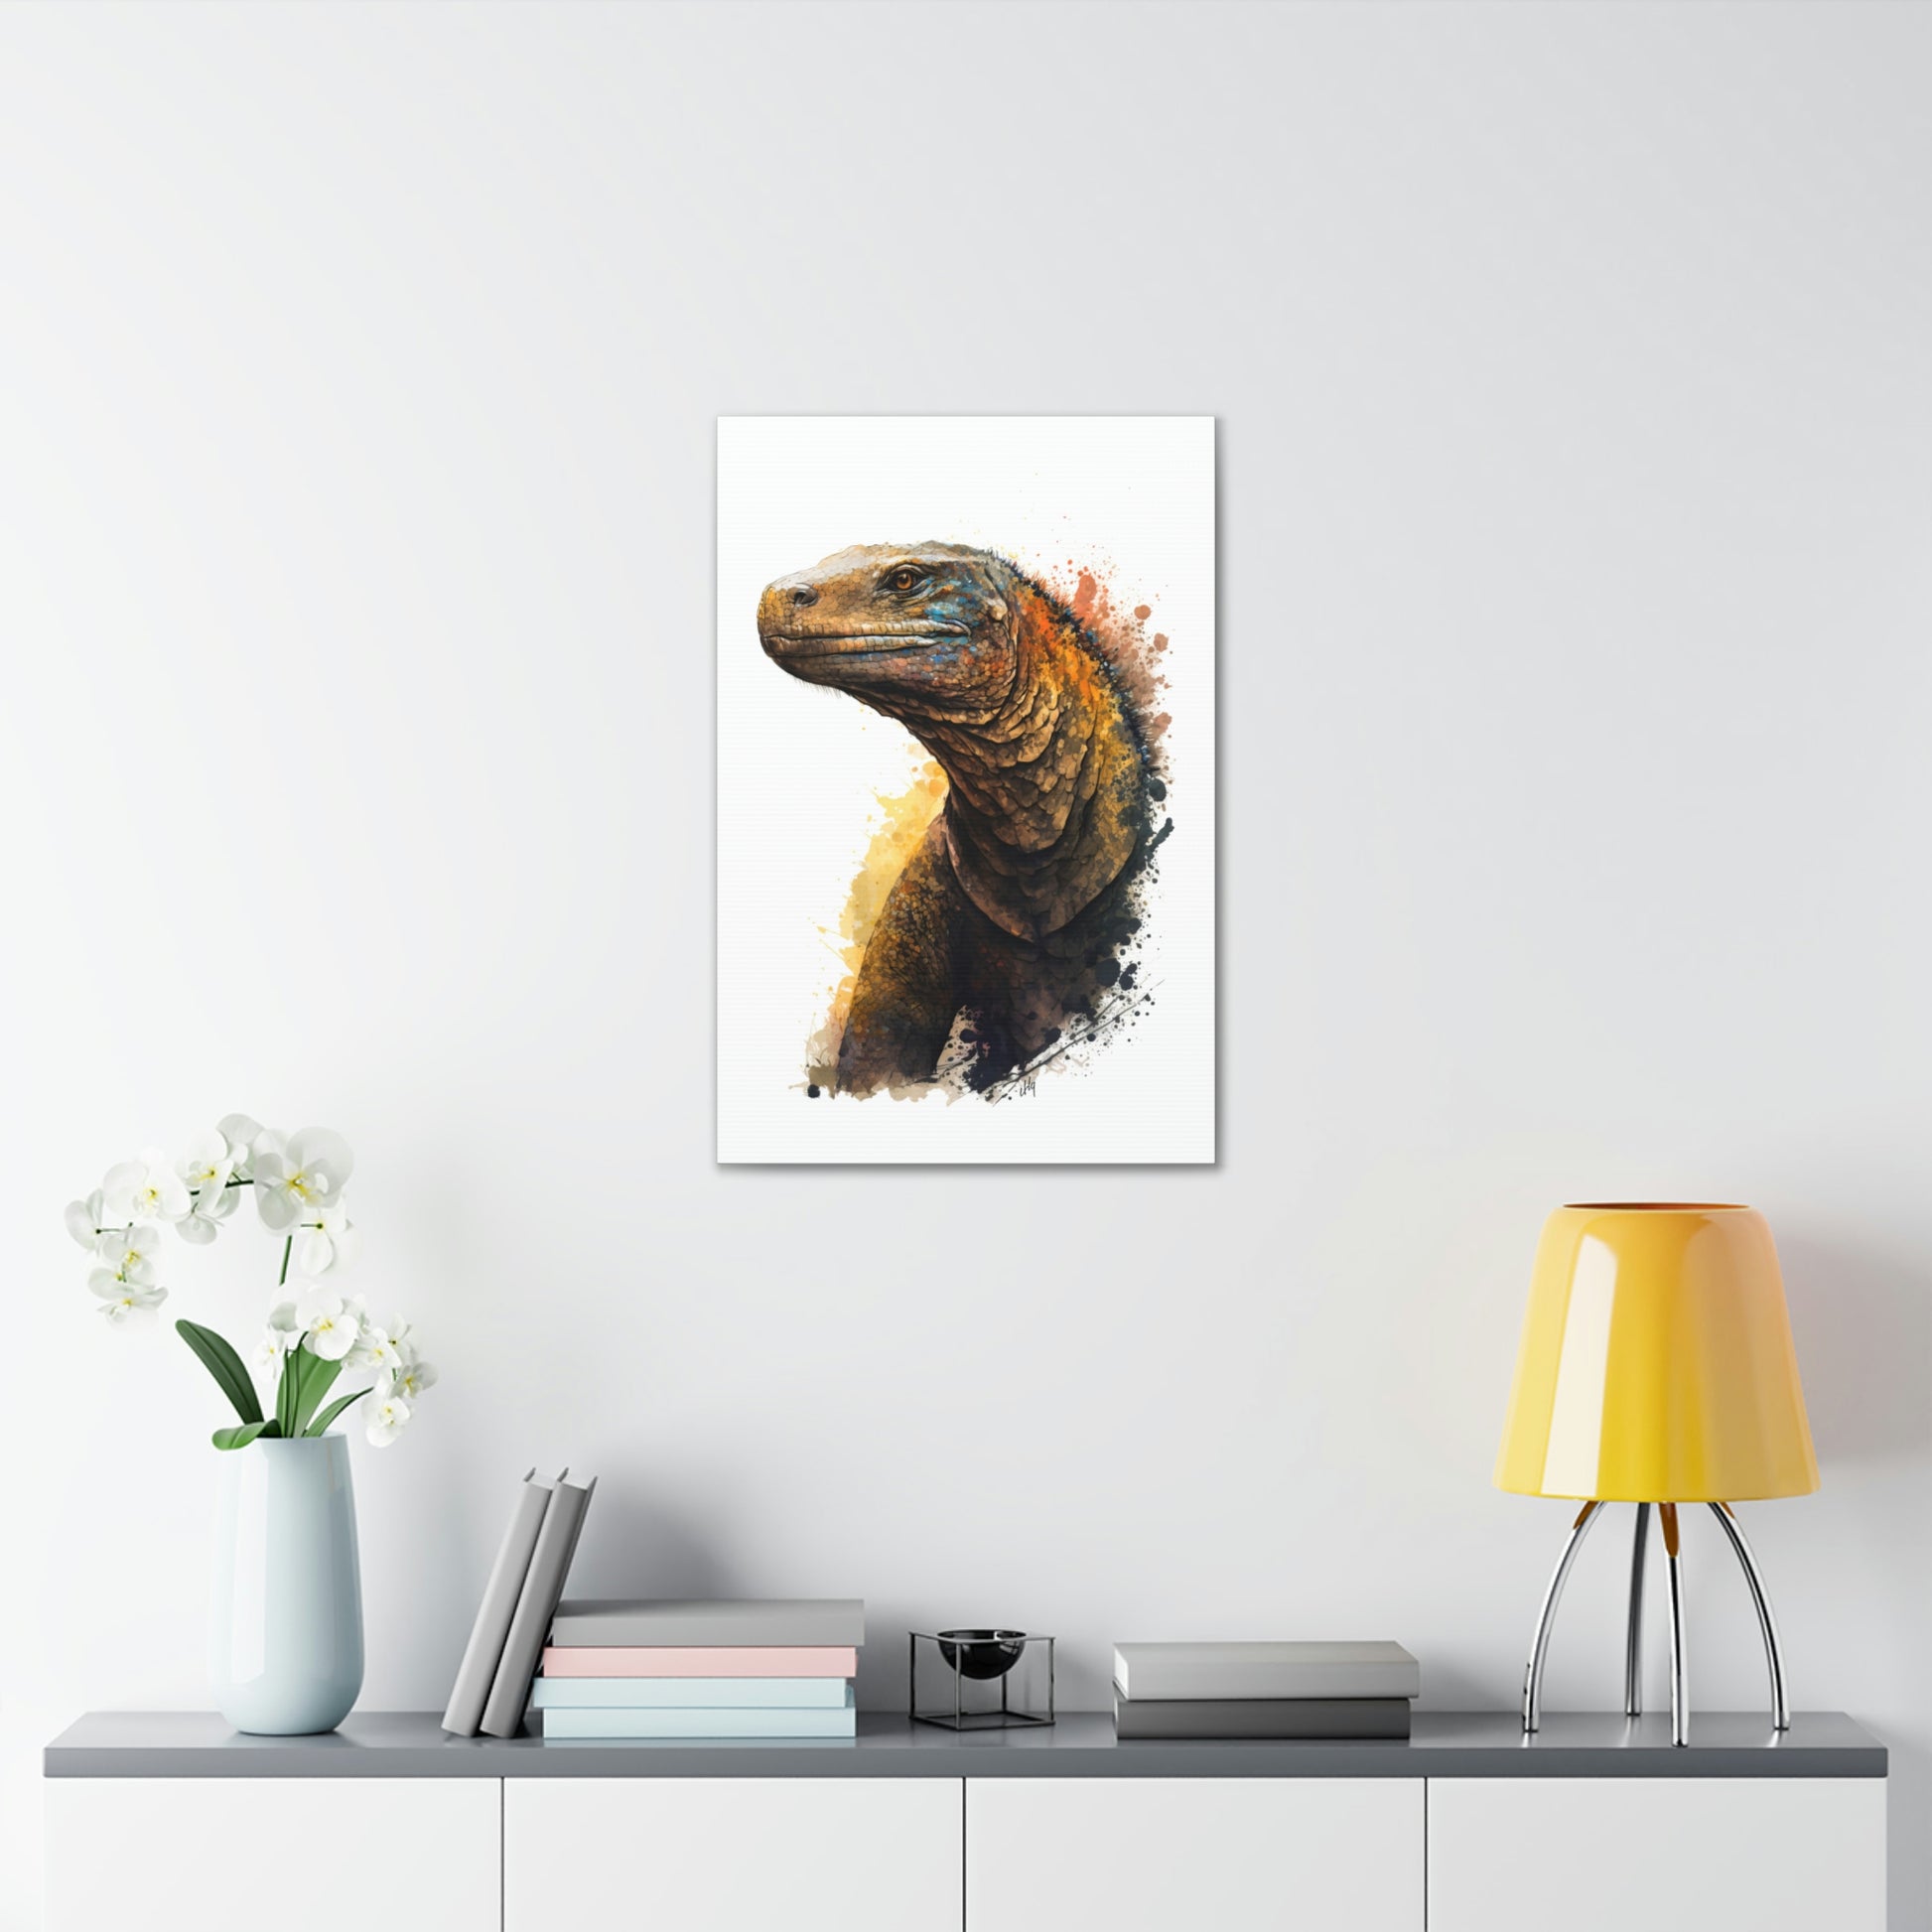 Komodo Dragon Wall Art from the Wildlife Collection, a detailed and vivid portrayal on canvas, highlighting the formidable grace of this ancient reptile. An essential pick for lovers of unique wall art, nature-centric gallery installations, commanding canvas pieces, and an infusion of the wild into modern home aesthetics.